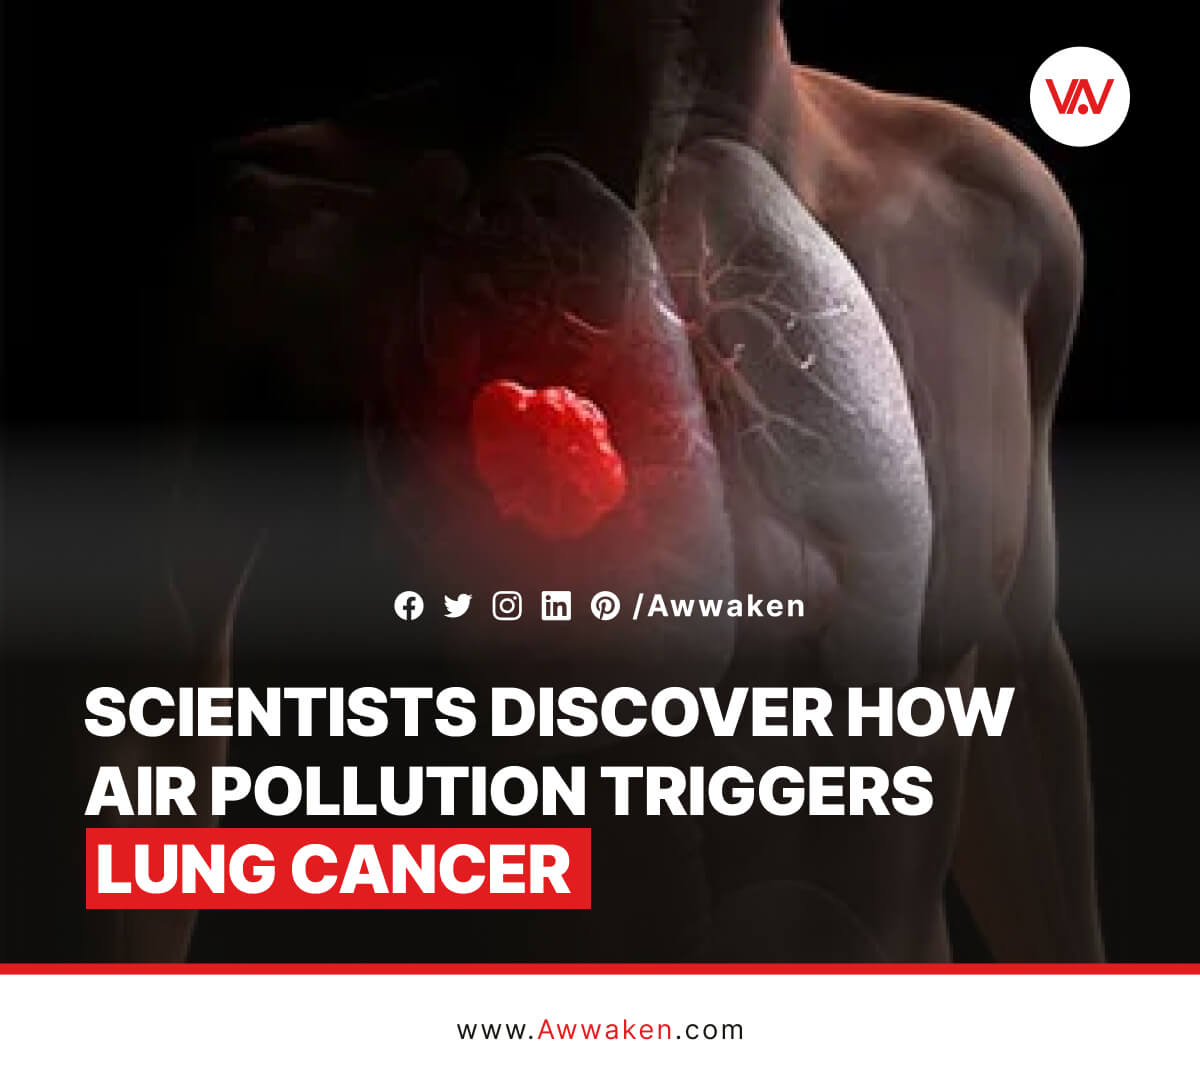 Lung cancer is caused by air pollution, scientists discover_awwaken